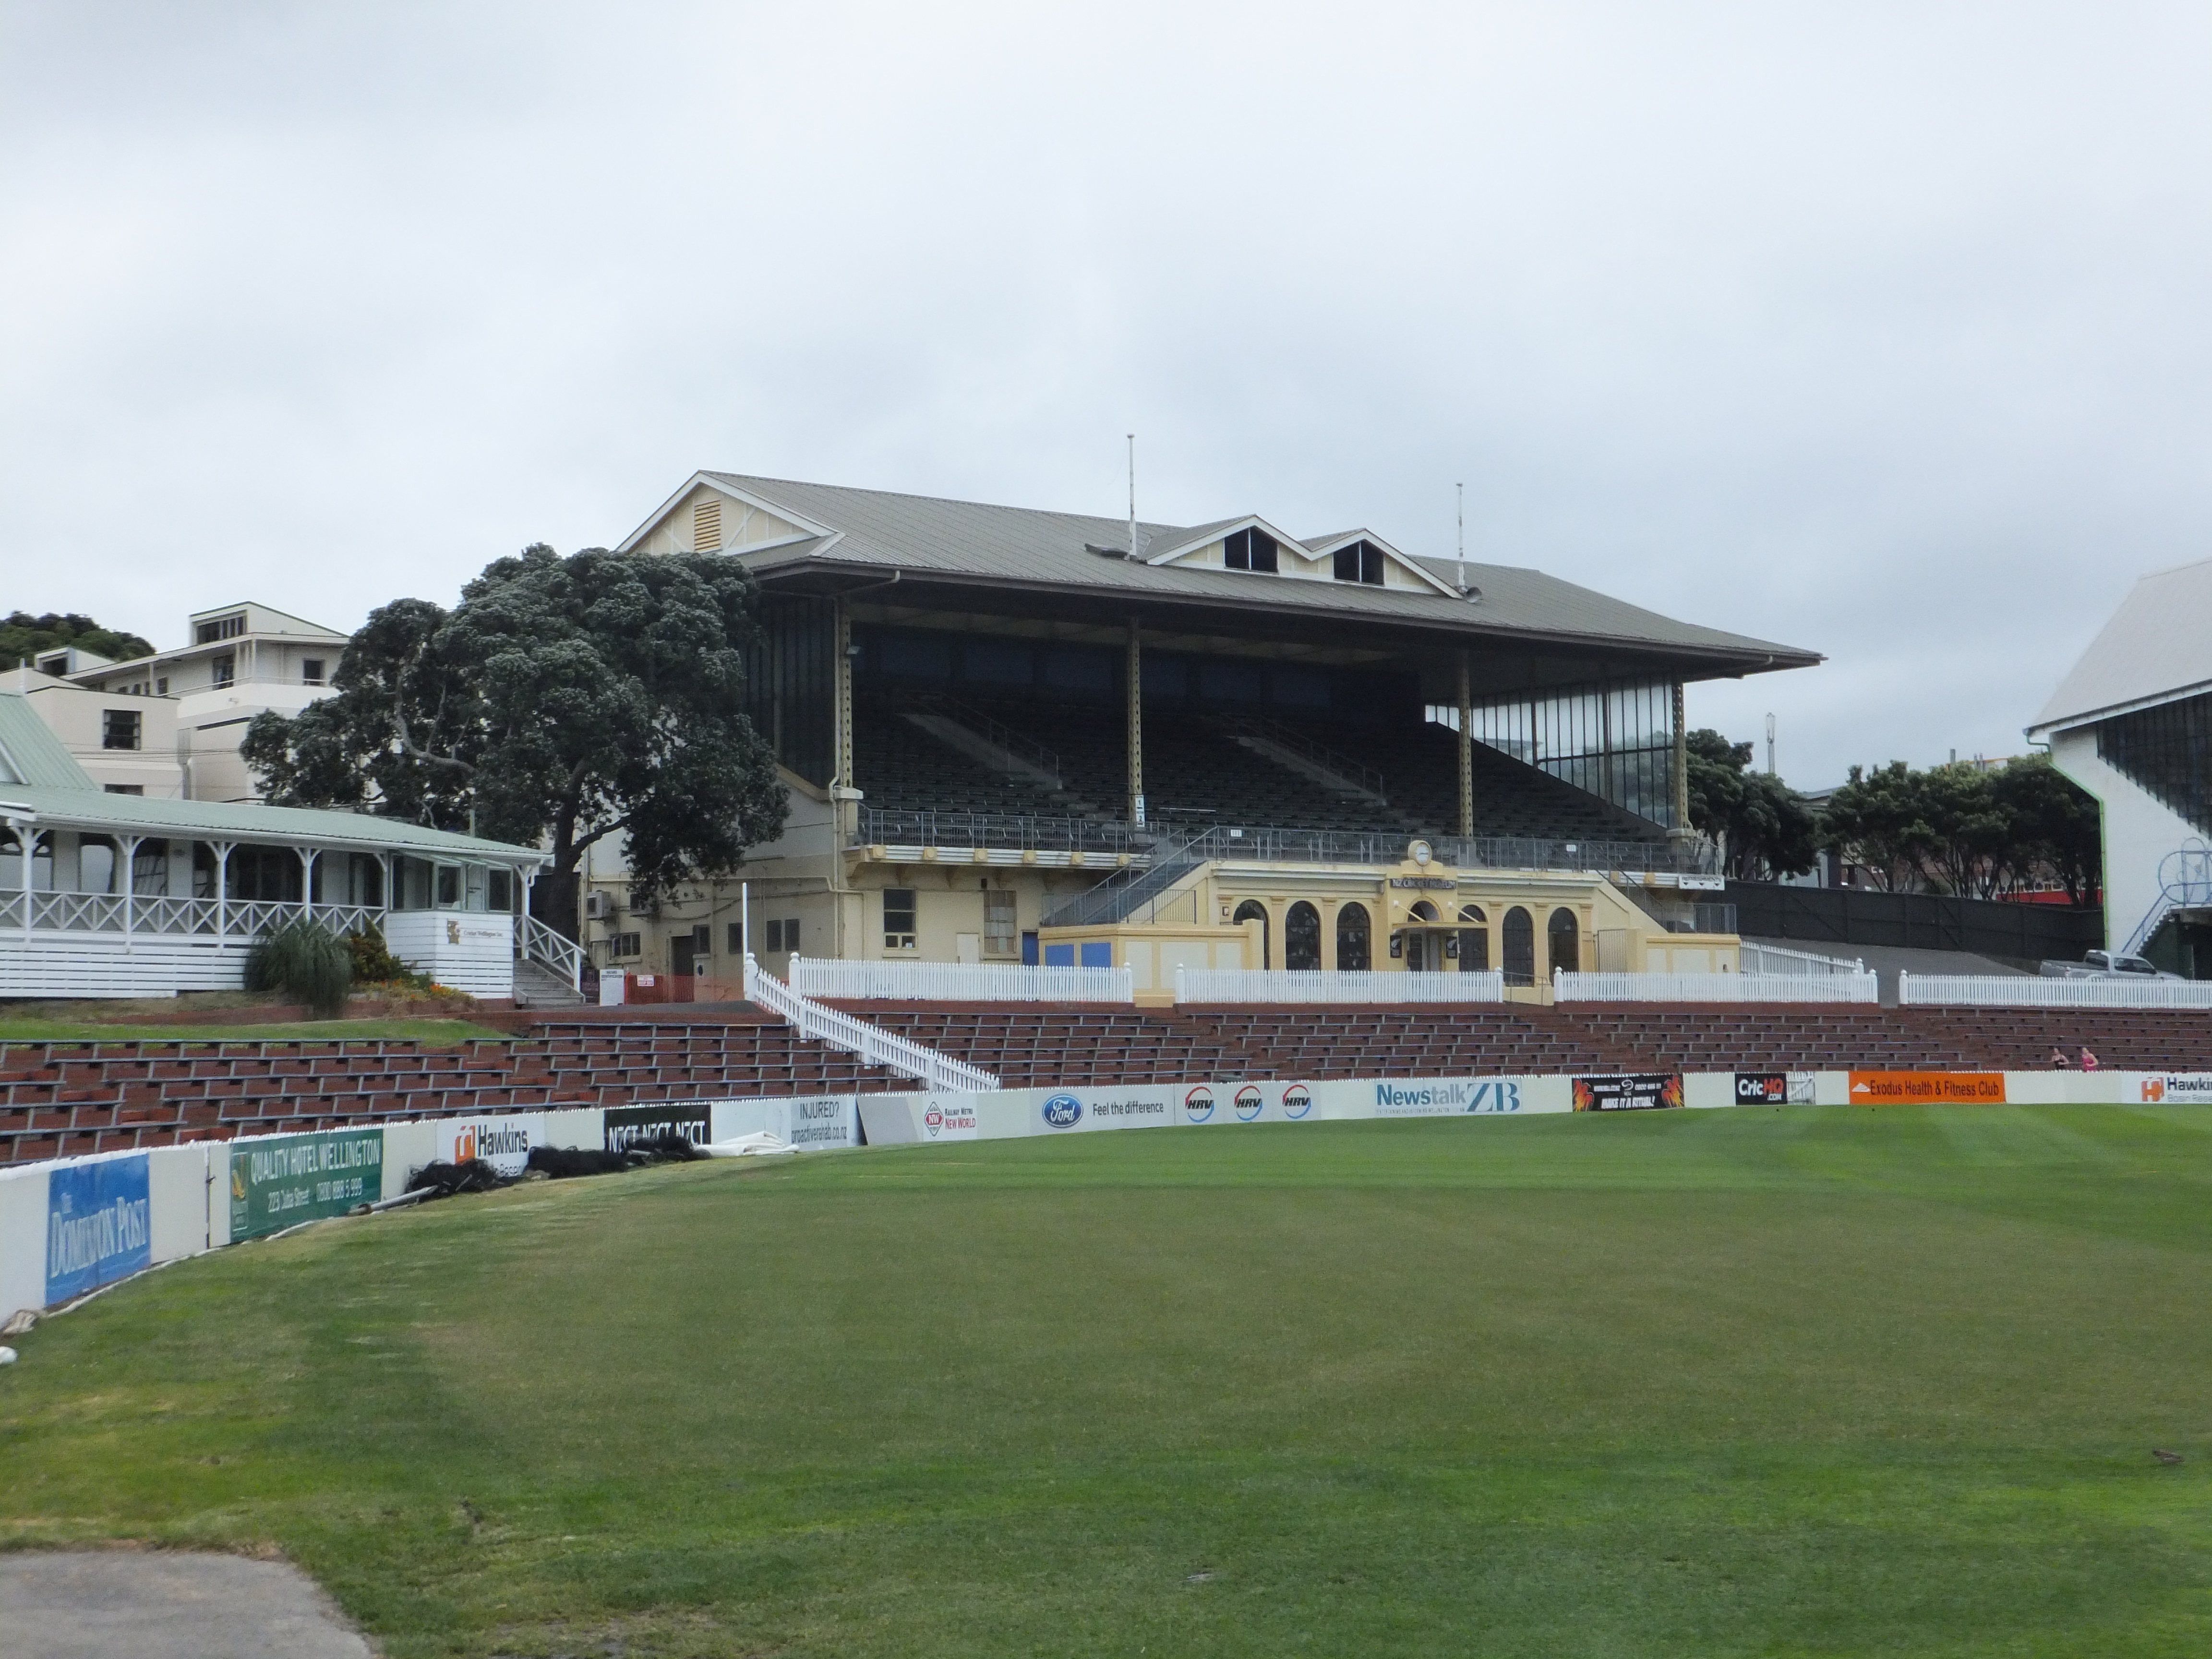 File:Old Grandstand at Basin Reserve.JPG - Wikimedia Commons